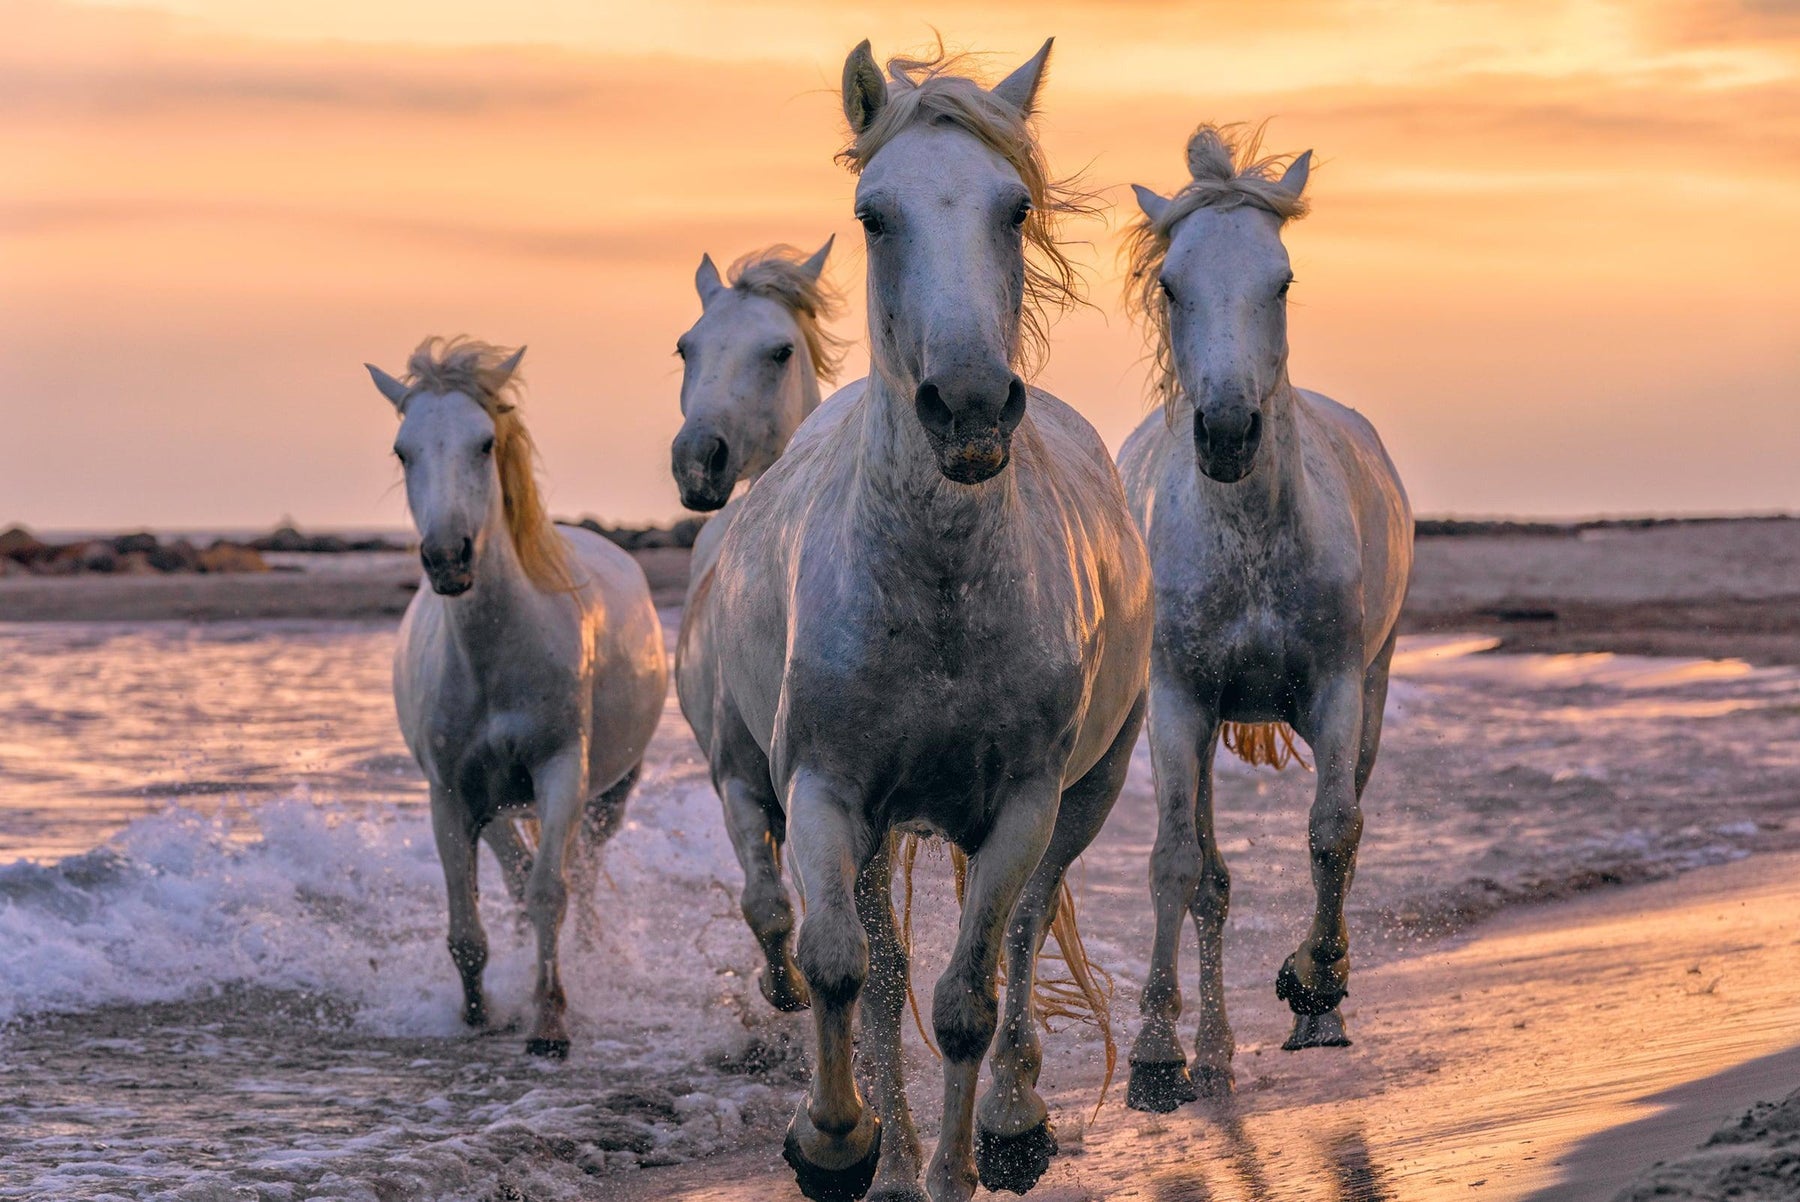 Four white horses running along the beach in Camargue France at sunset